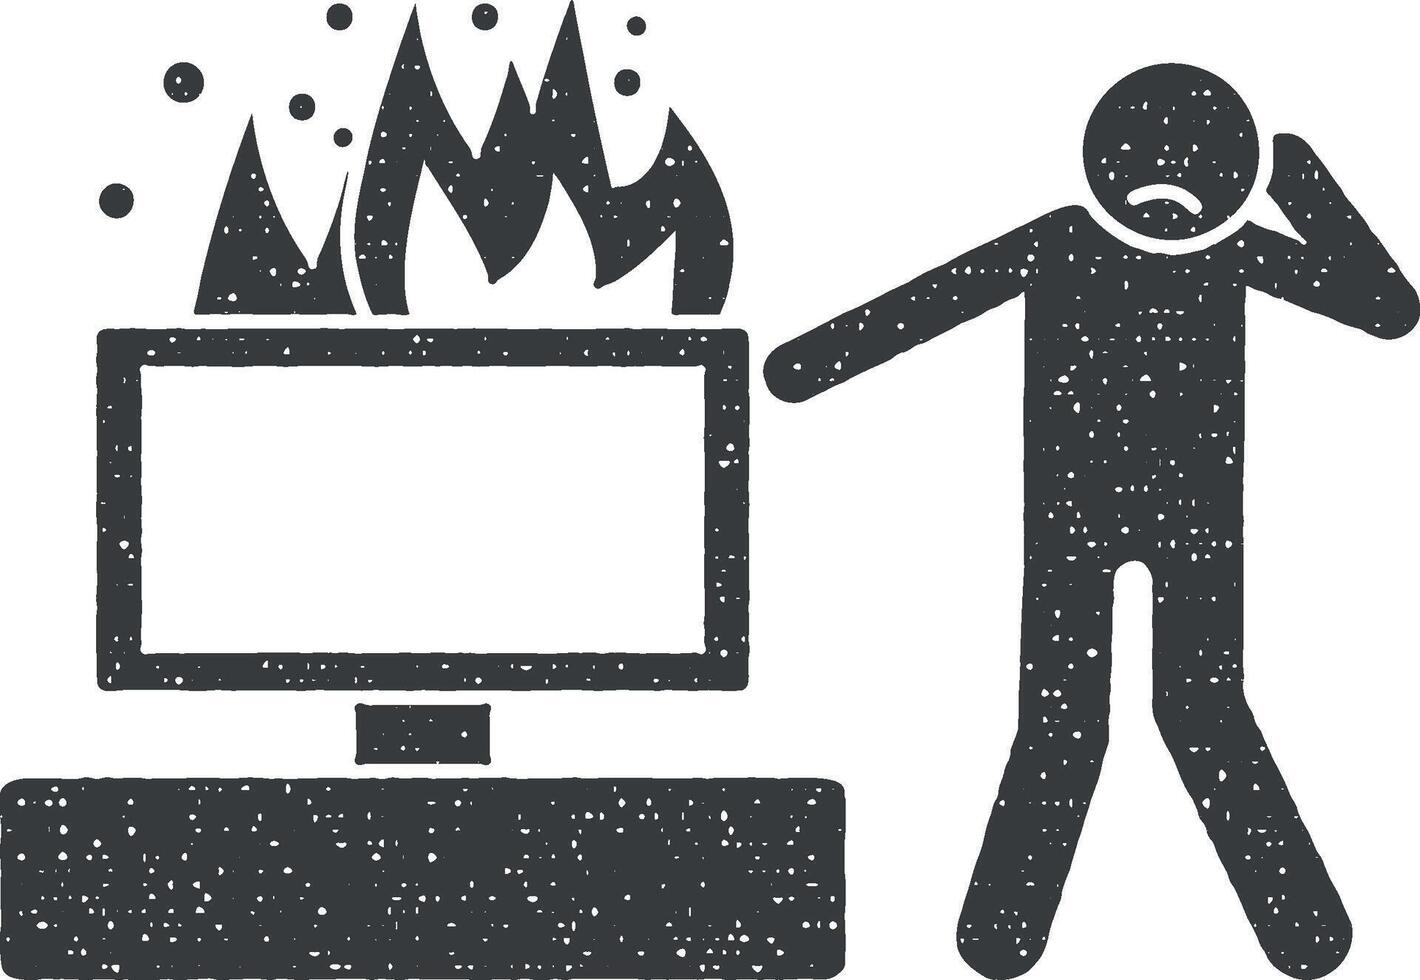 Tv in fire and man cry icon vector illustration in stamp style